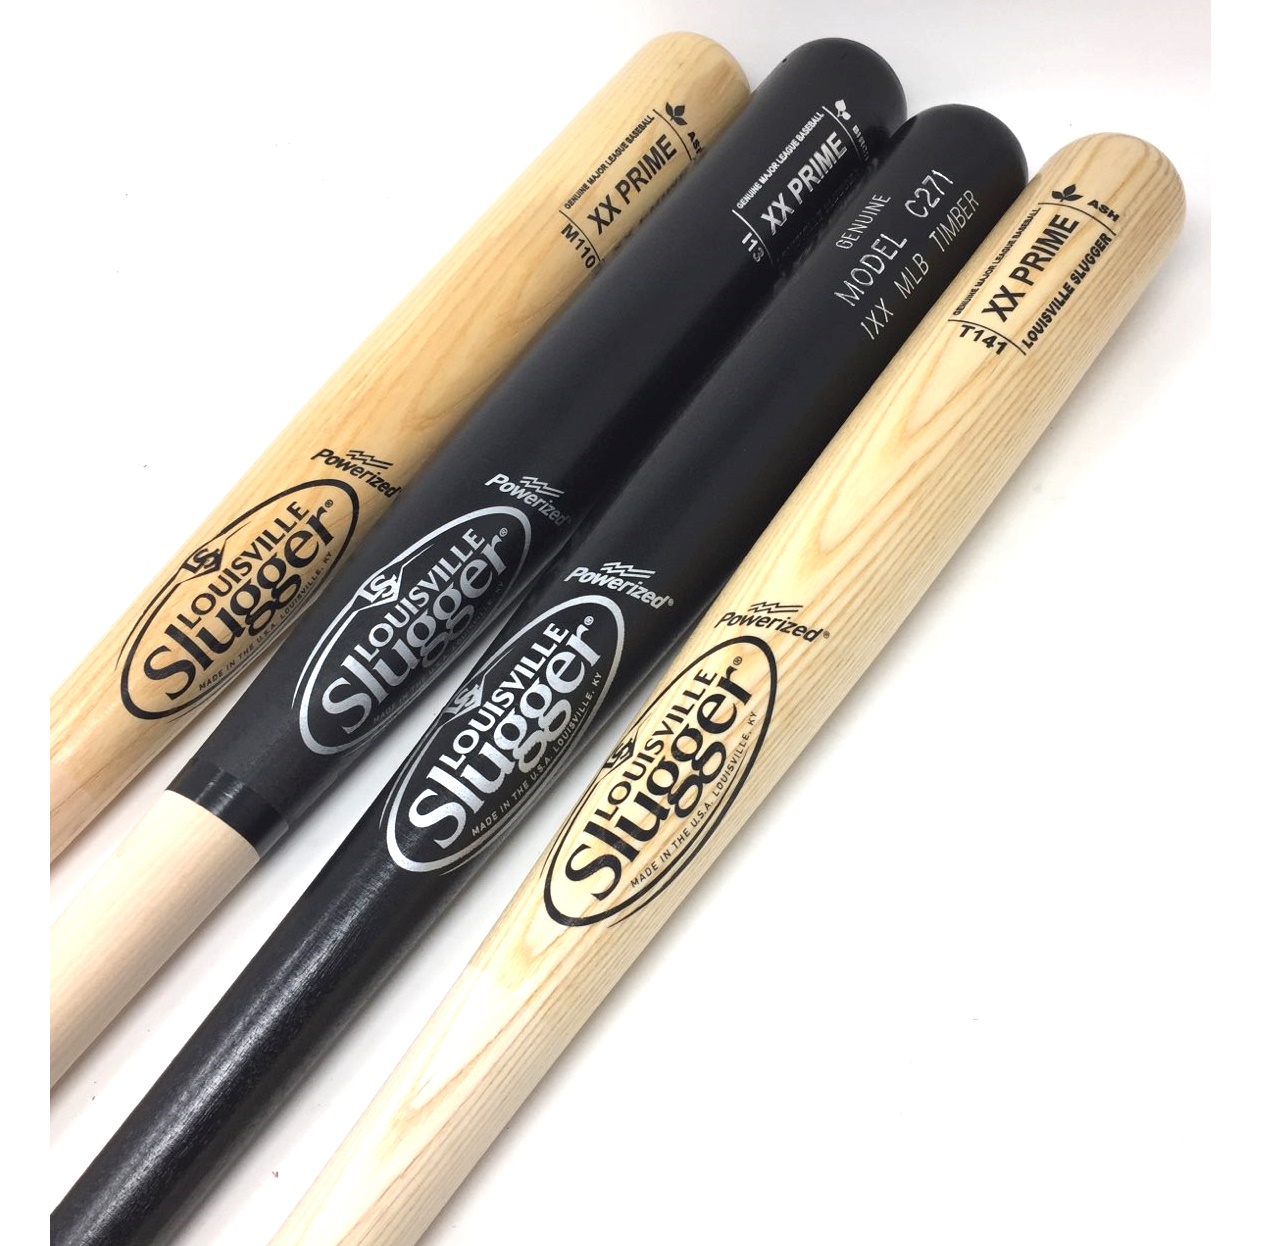 33 Inch Wood Bats from Louisville Slugger.  1. XX Prime Birch I13 Cupped 2. 1XX MLB Timber 271 Not Cupped 3. XX Prime Ash T141 Cupped 4. XX Prime Ash M110 Cupped